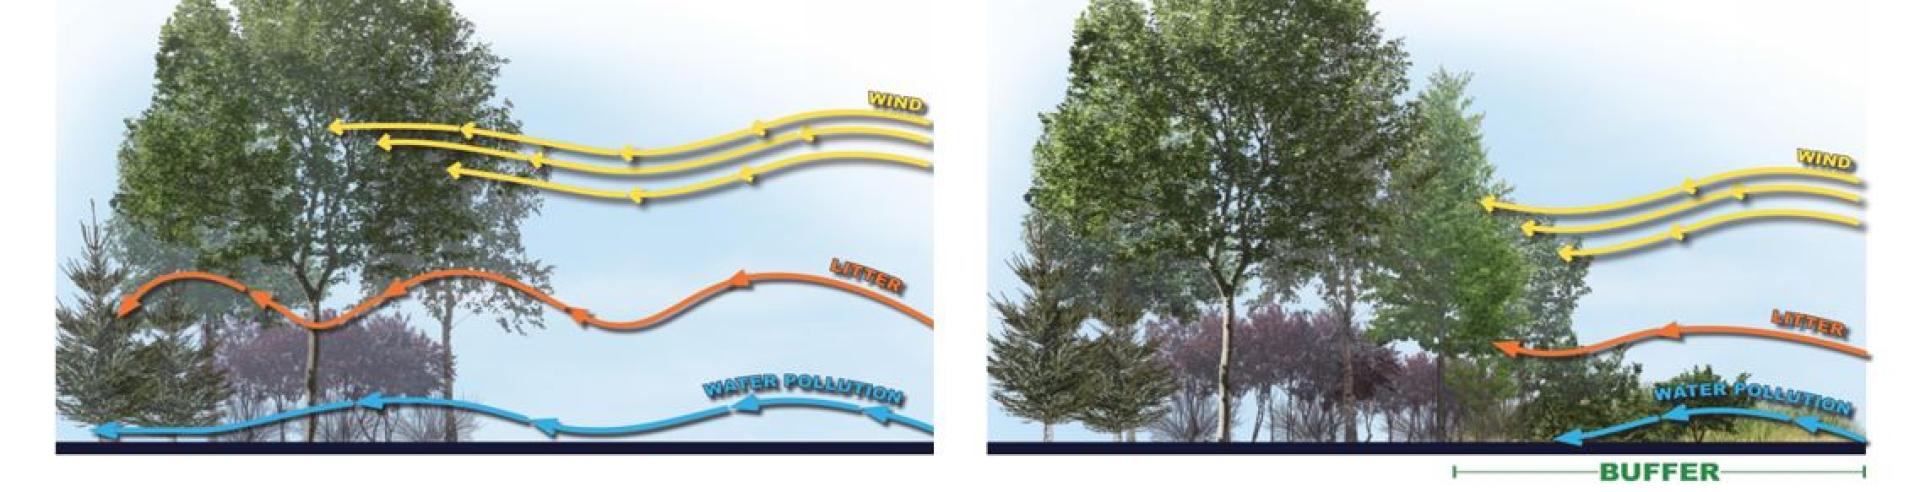 Trees with a buffer versus trees without a buffer